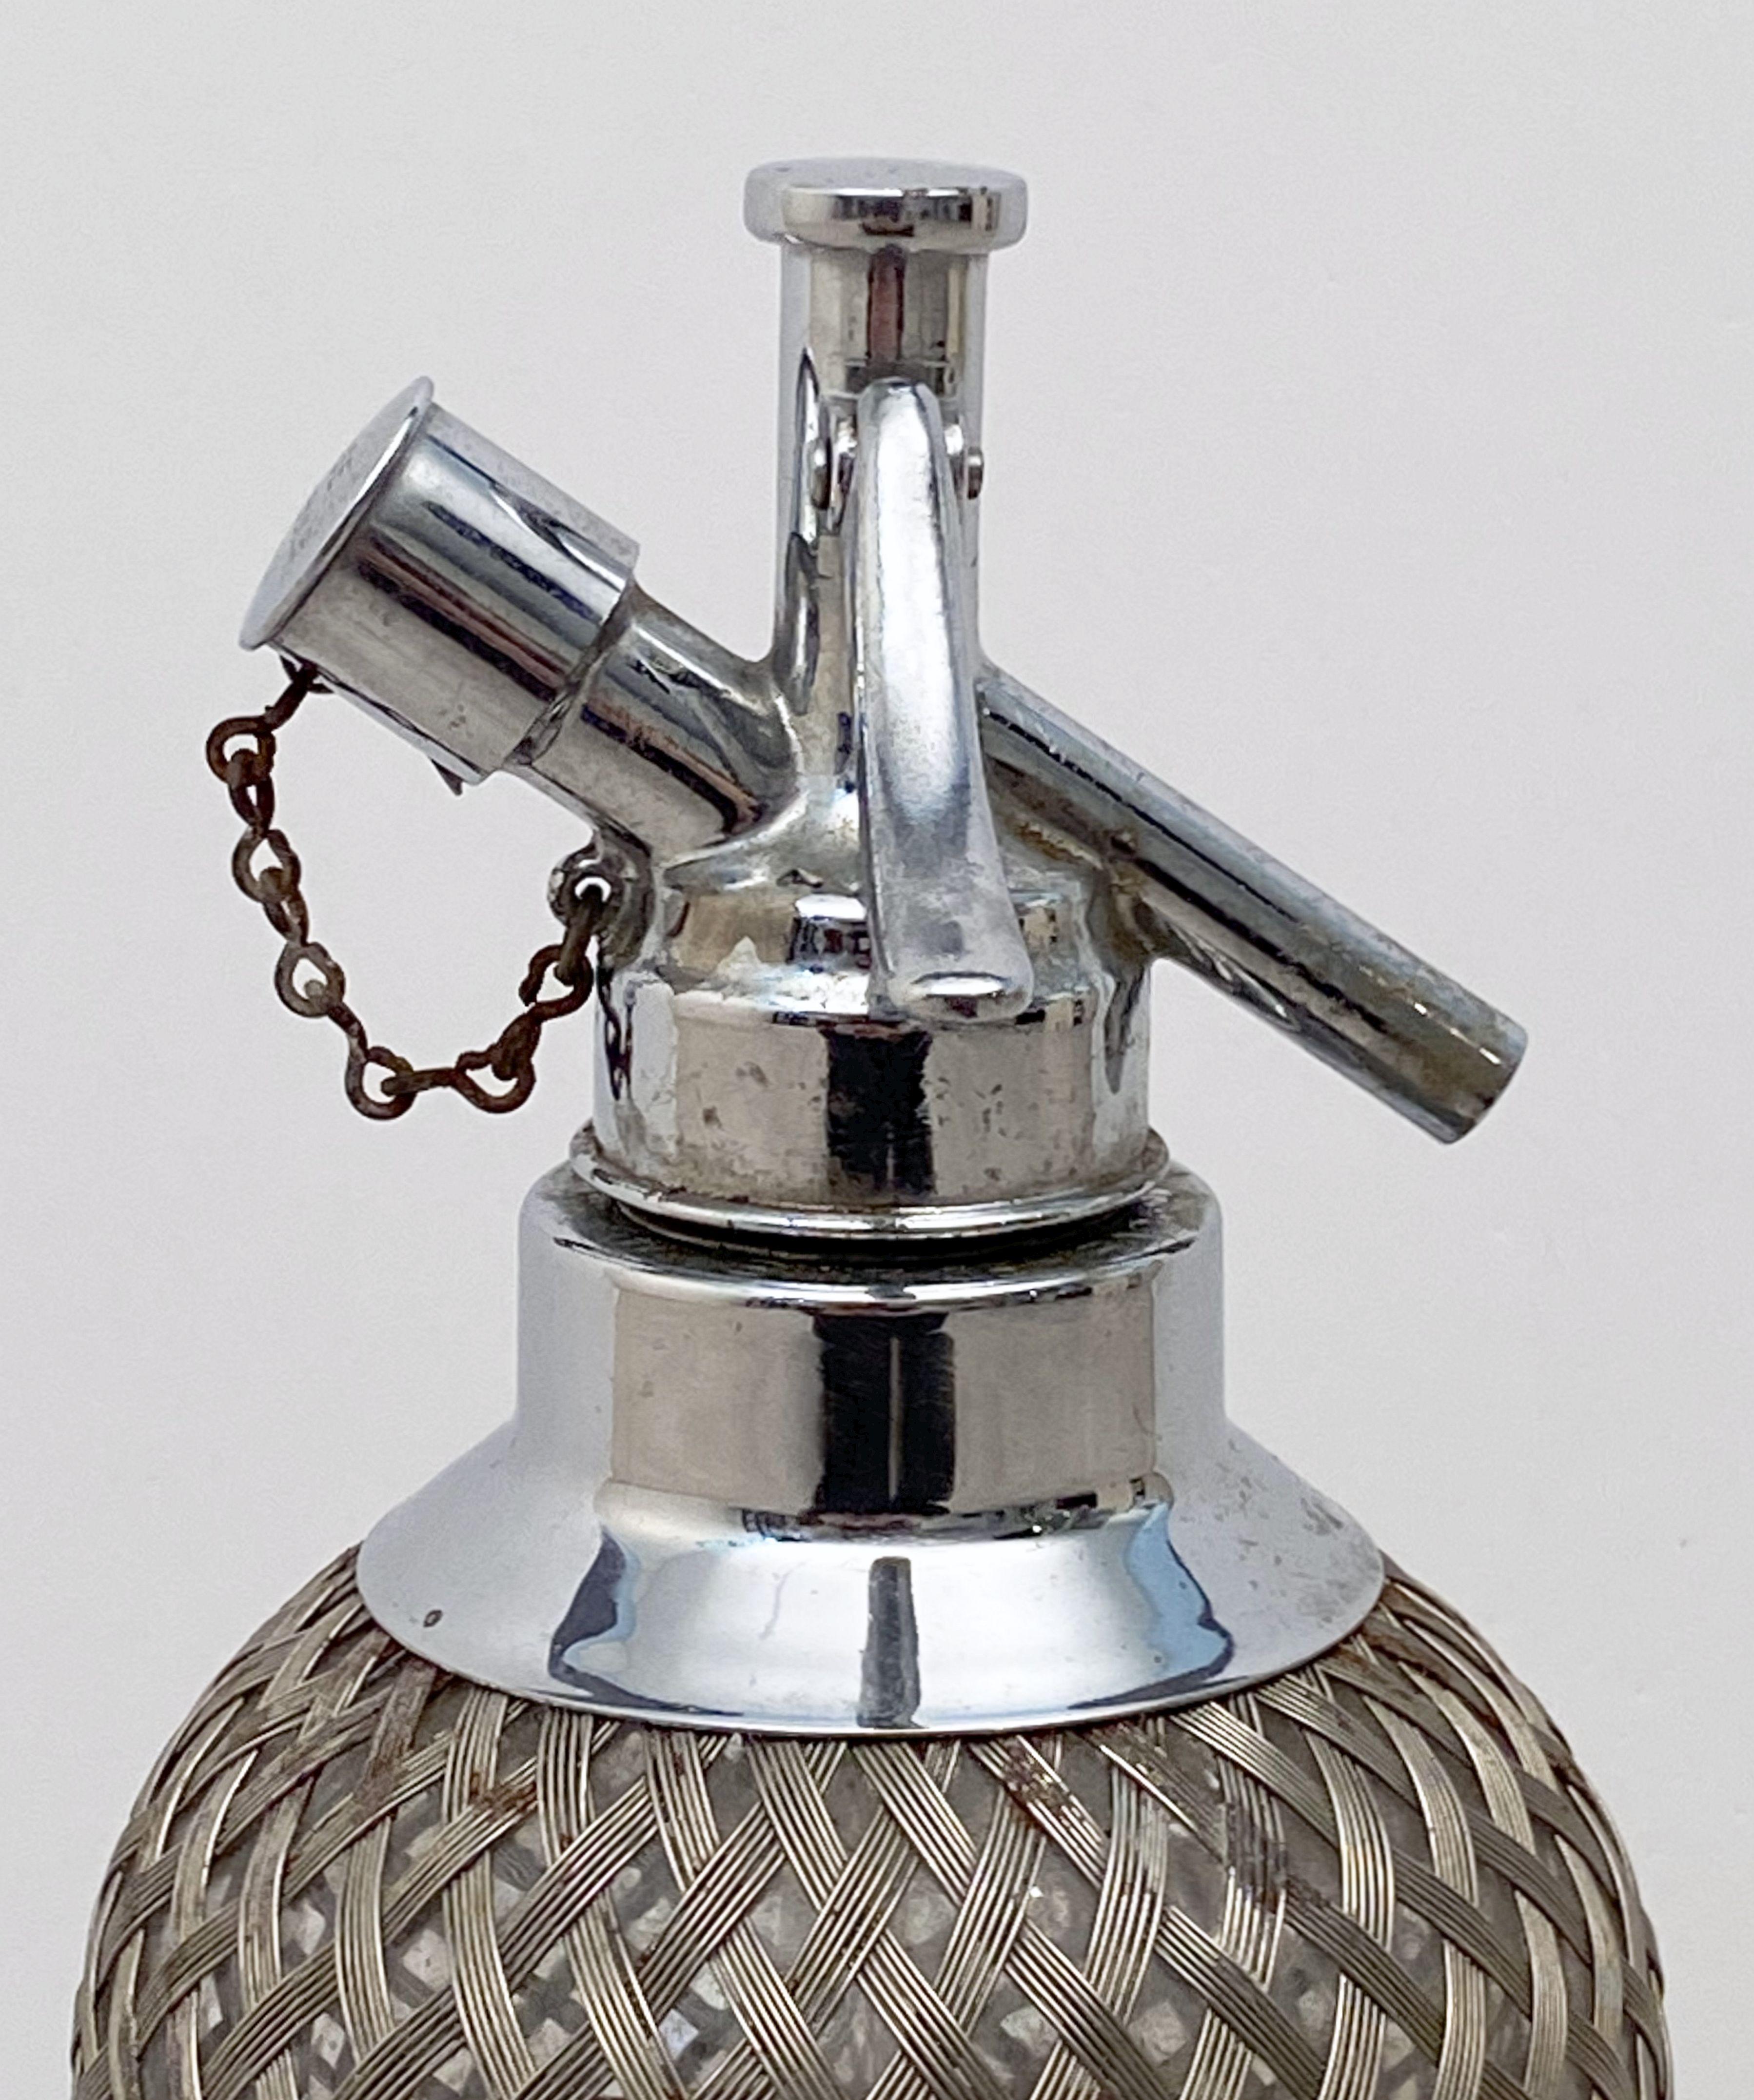 Metal Art Deco Chrome and Wire Mesh Soda Siphon by Sparklets of London